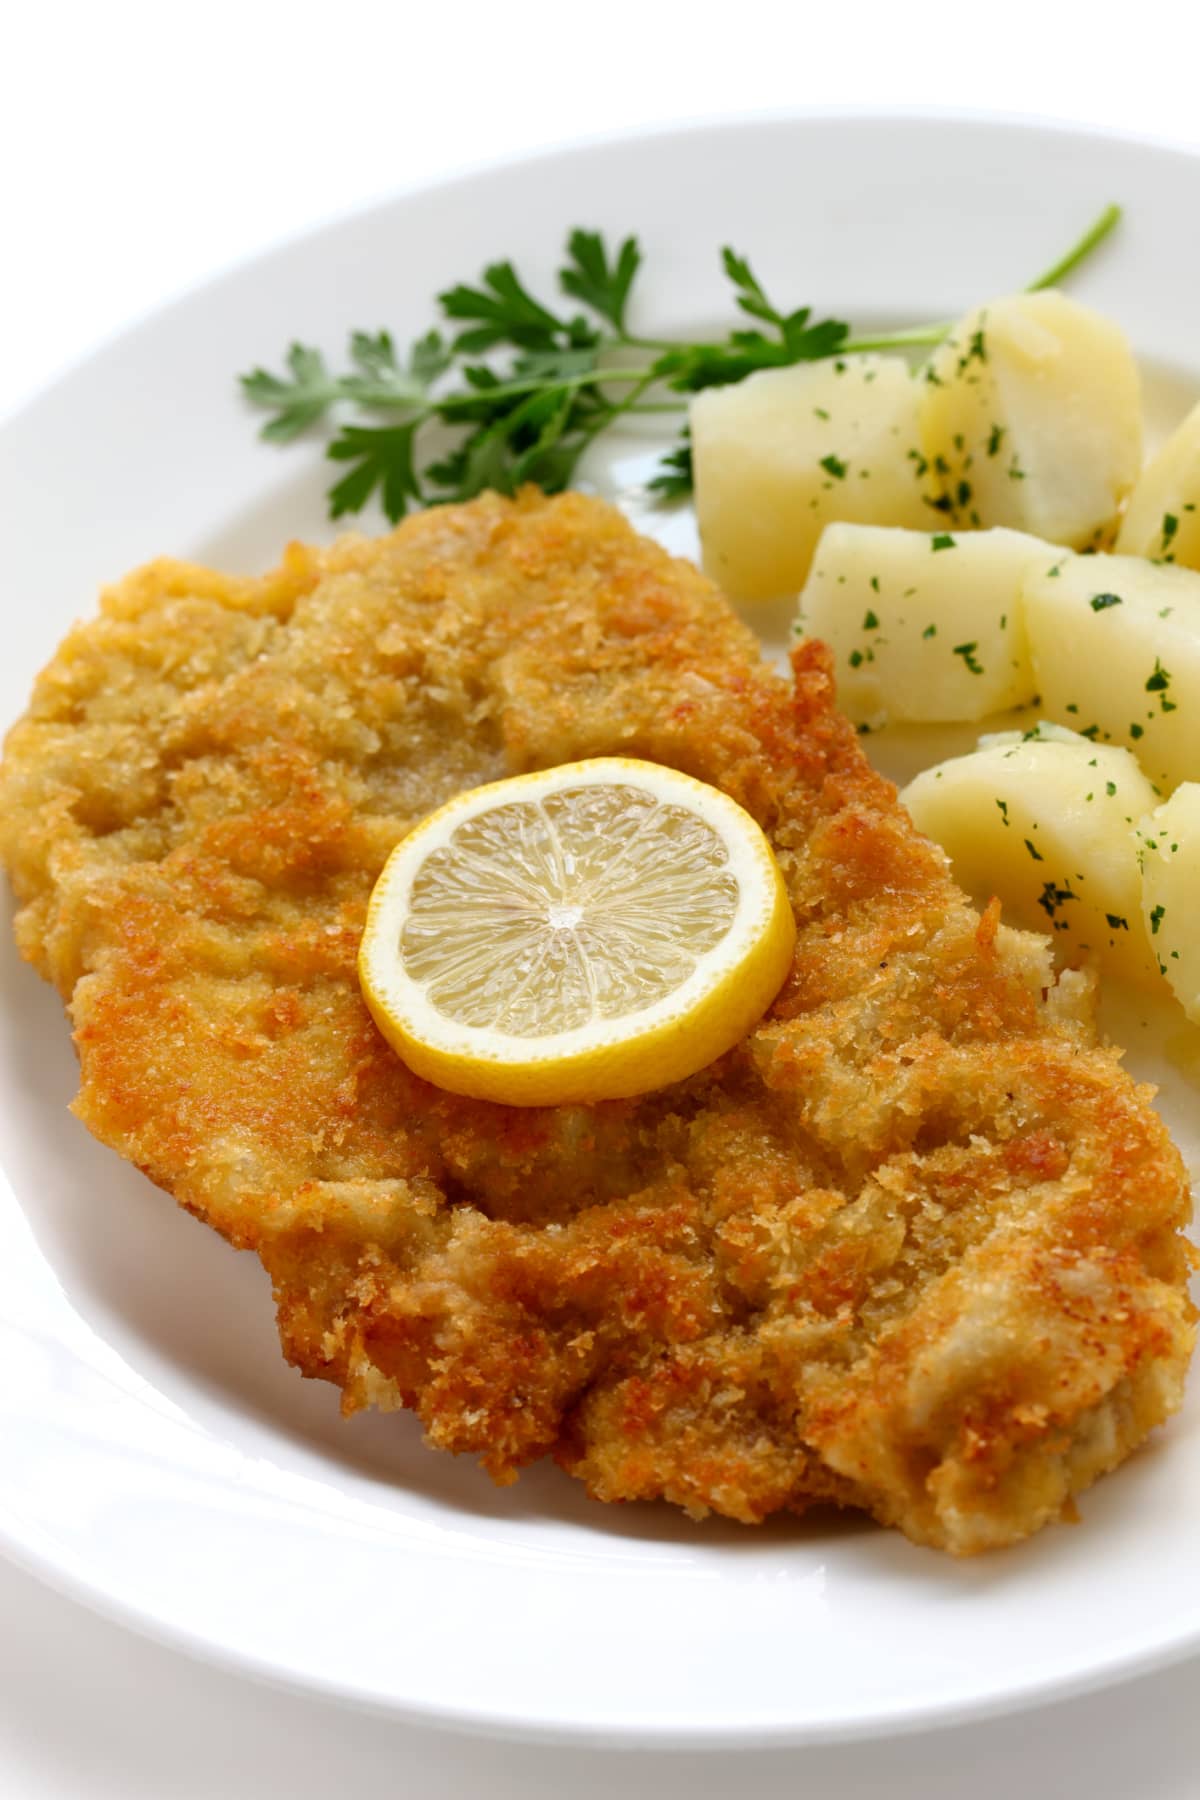 Breaded cut of meat on a plate with potatoes